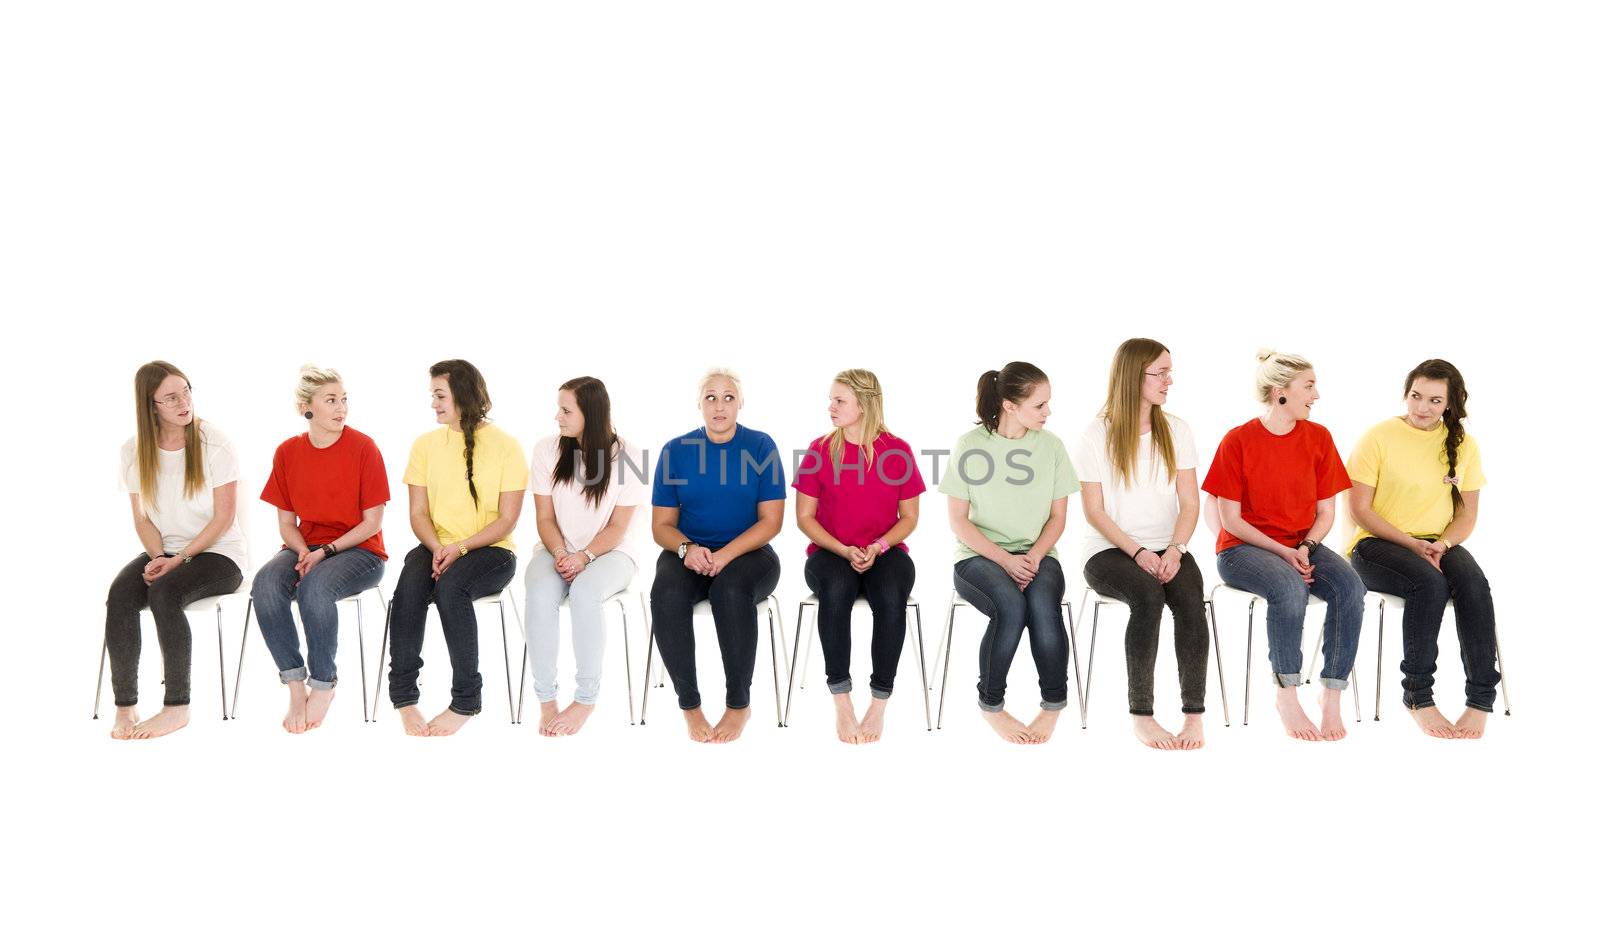 Group of Young women sitting on chairs wearing colorfull t-shirts